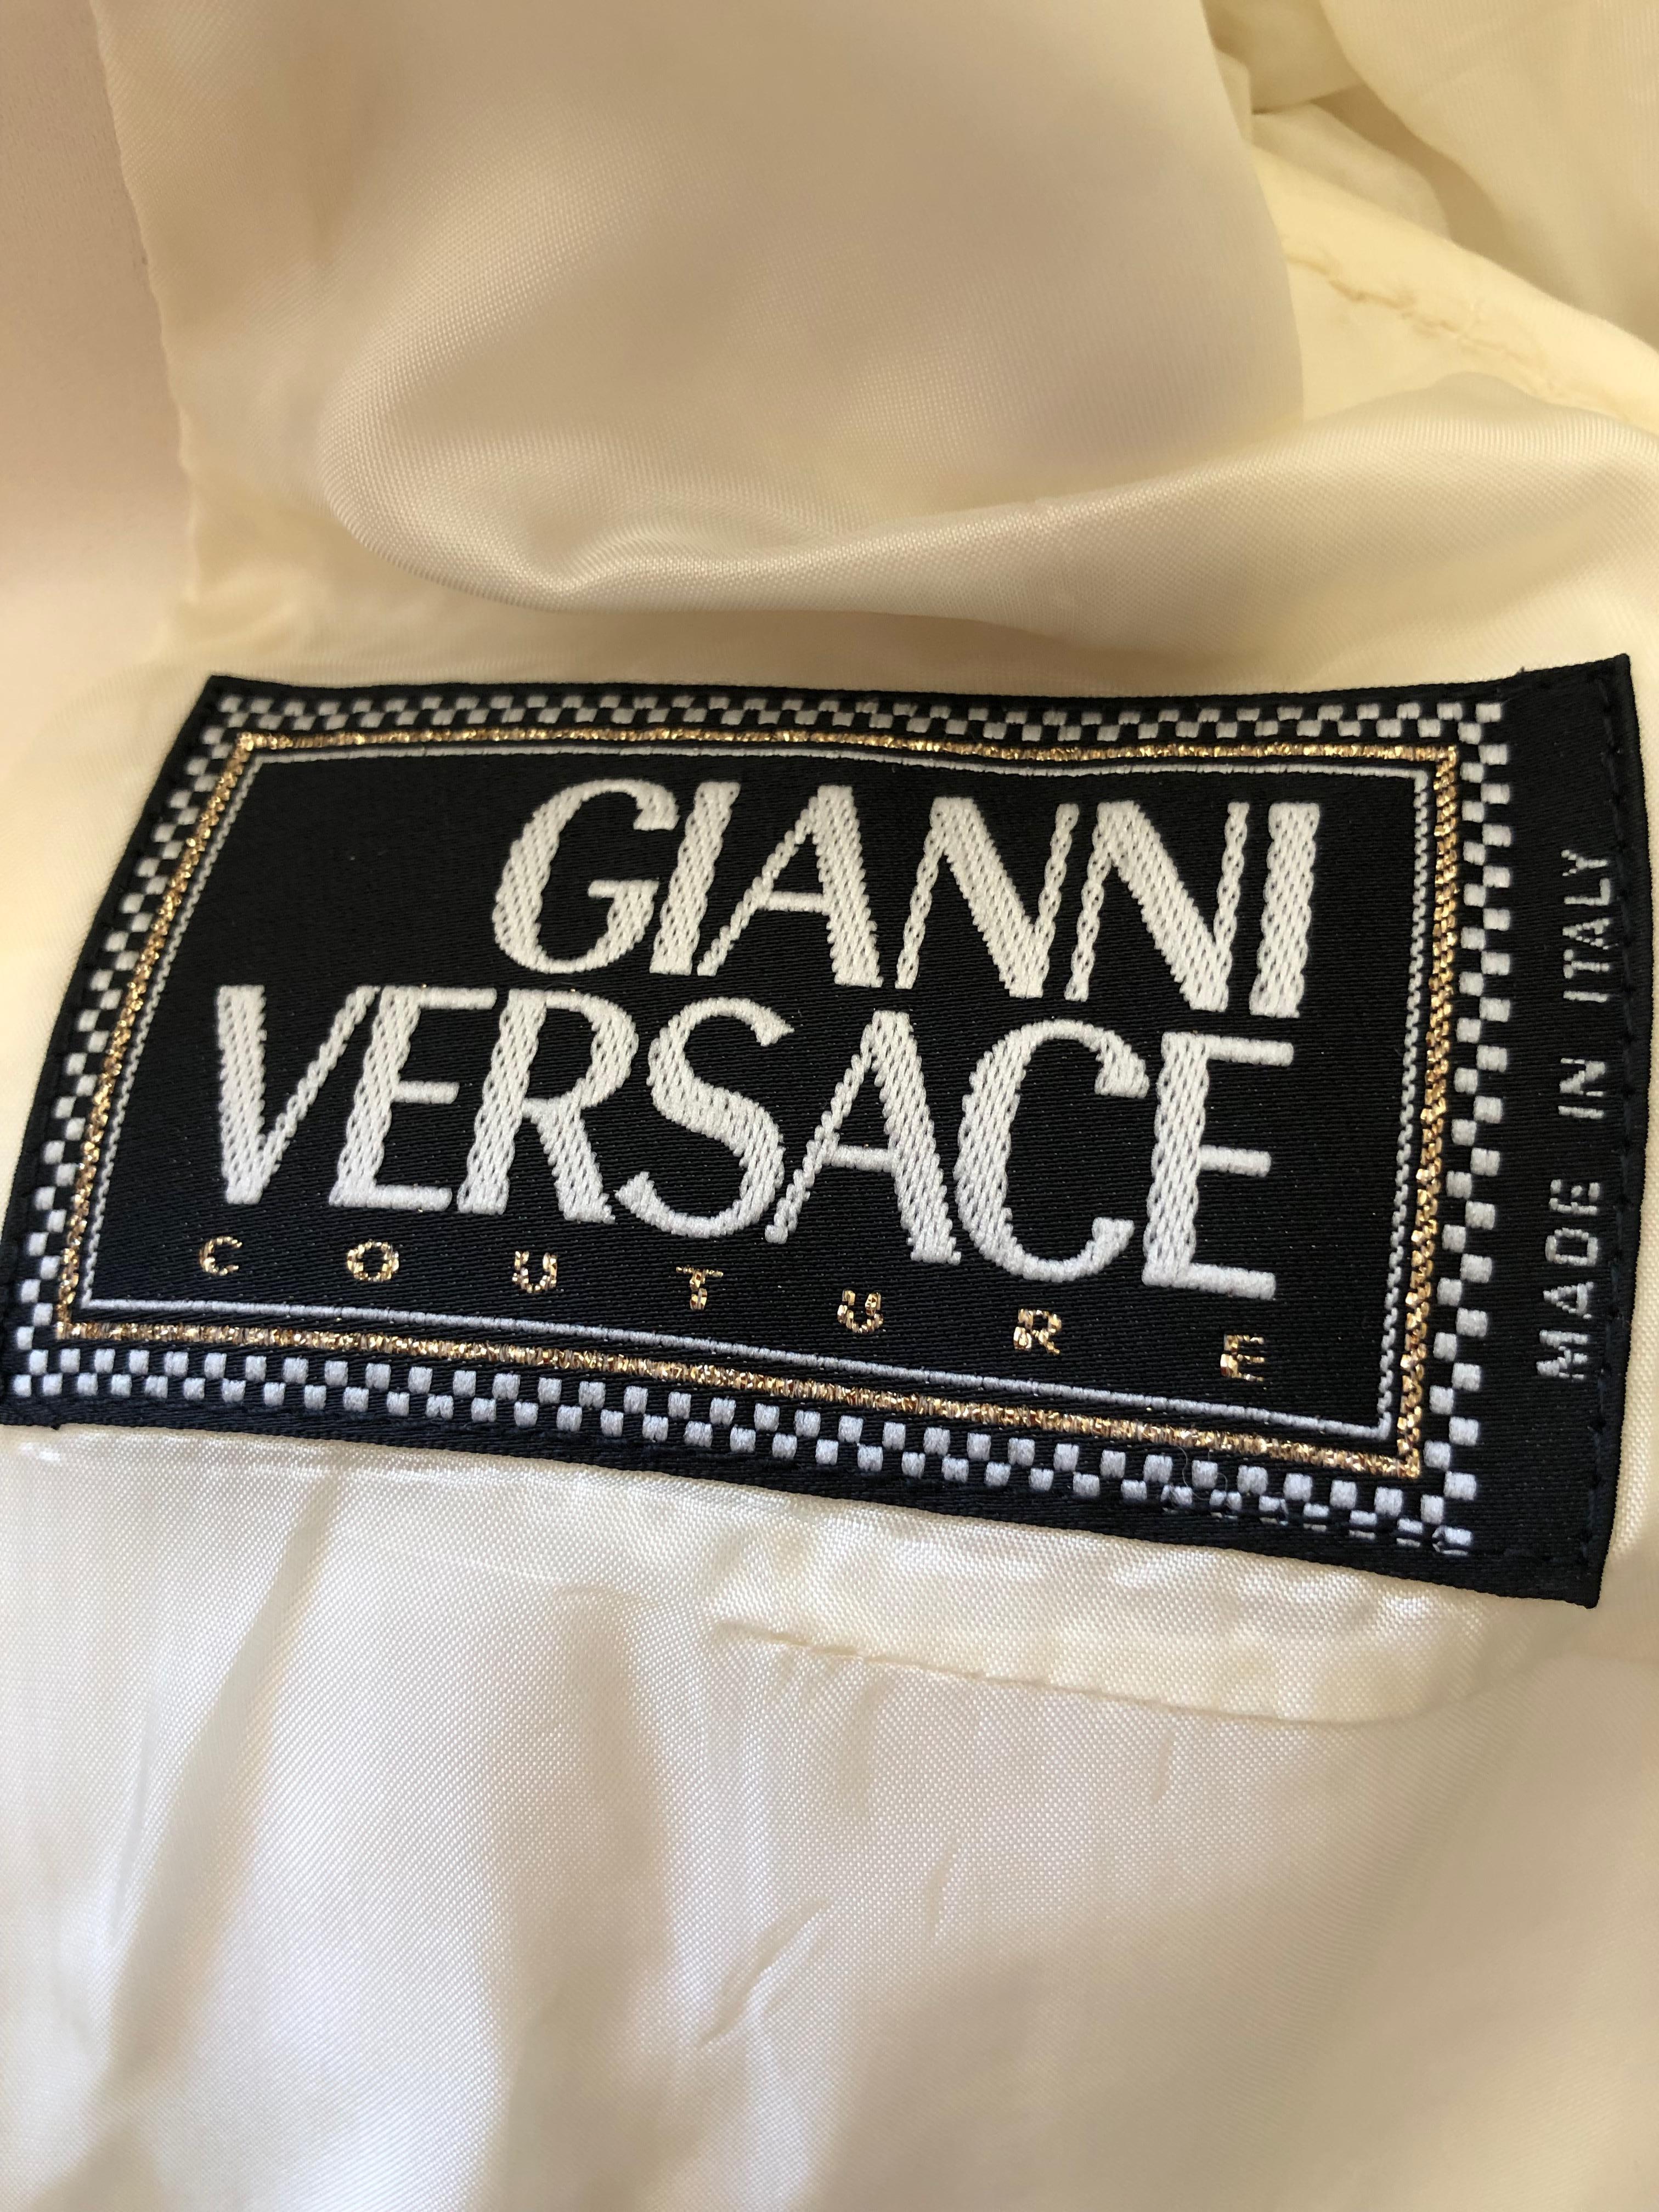 Gianni Versace Couture Fall 1992 Ivory Linen Tuxedo Suit w Corset Stay Details For Sale 2